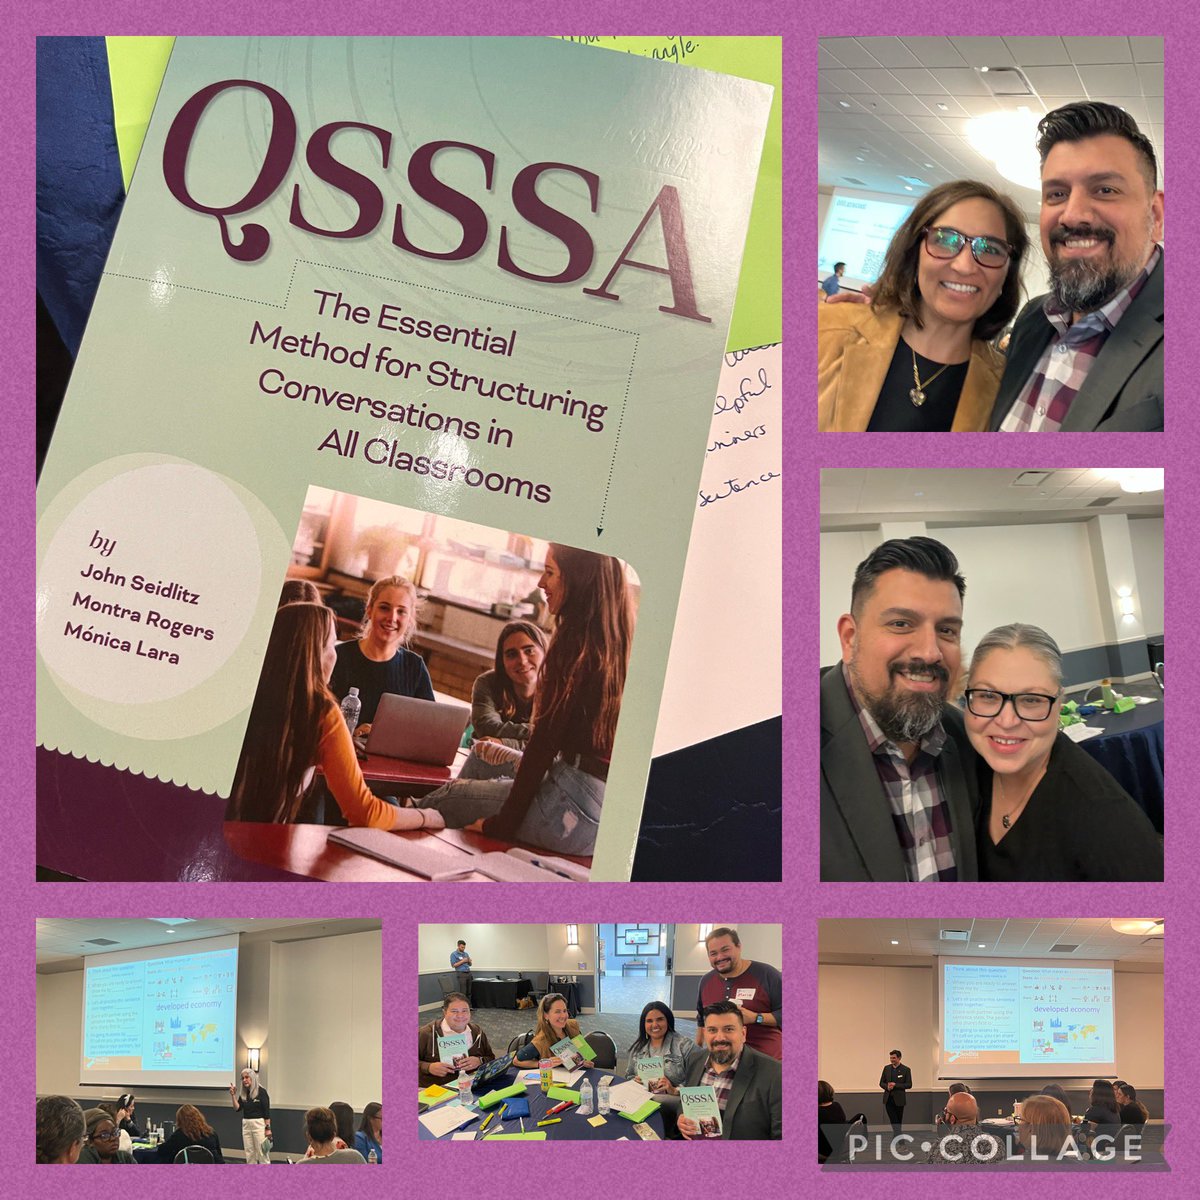 What a day! From reading to 1st grade dual language learners to being a learner and expanding my tool kit with Dr. Lara & Dr. Fleenor. 😁 QSSSA to increase academic language for ALL especially emergent bilinguals ❤️@EISDofSA @DrH_OnTheEdge @robert_basurto @DRMLARA @stfleenor